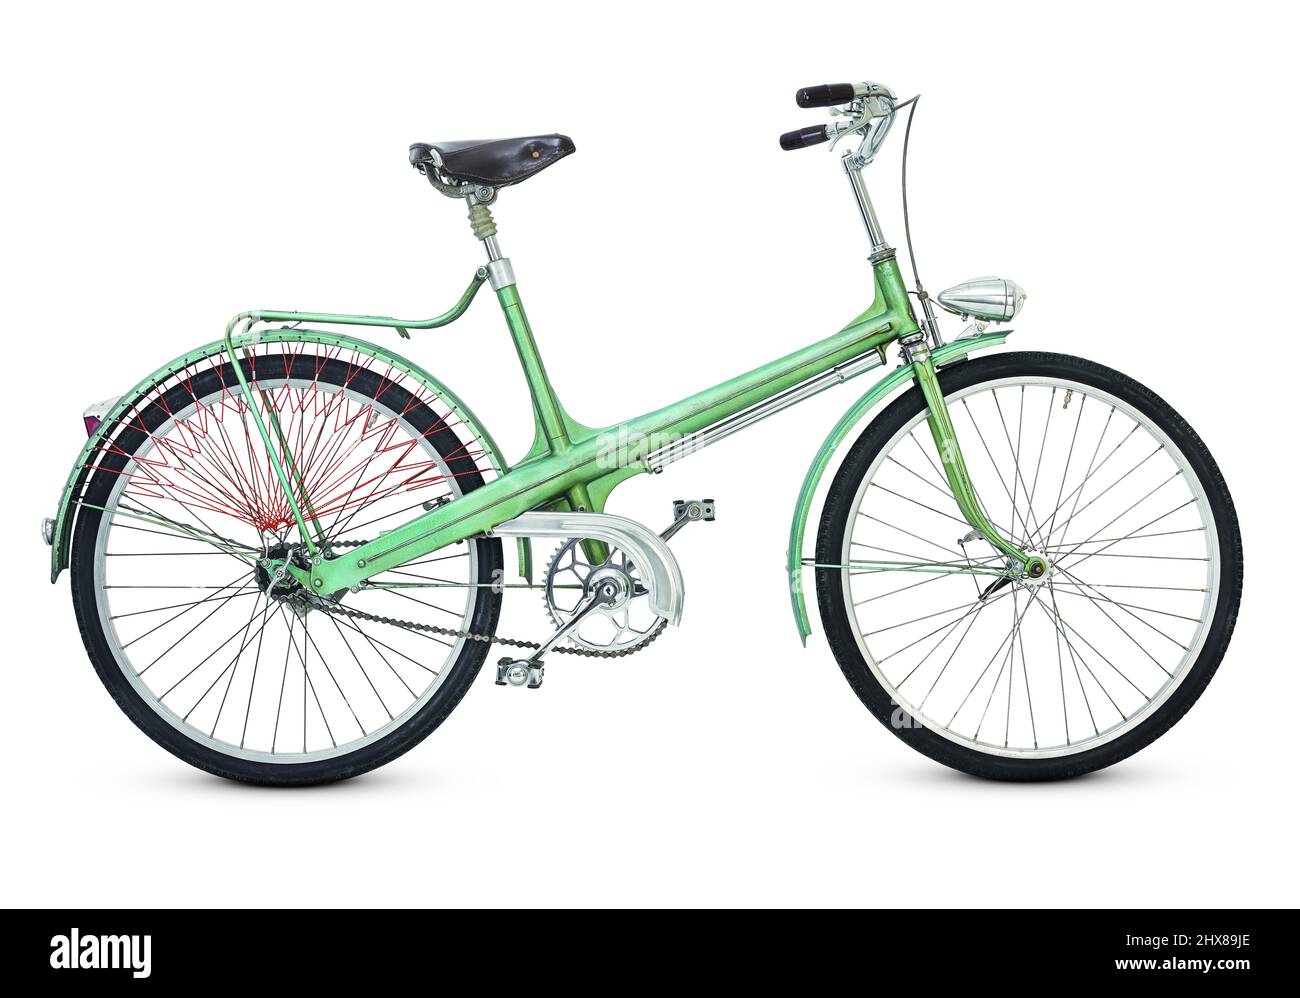 Kreuzrahmen - Fahrrad (cross frame), Uberlingen, Germany, 1952, side view, drive side.  Number of gears: 0 Wheel size: 26' Special features: frame construction is patent Stock Photo